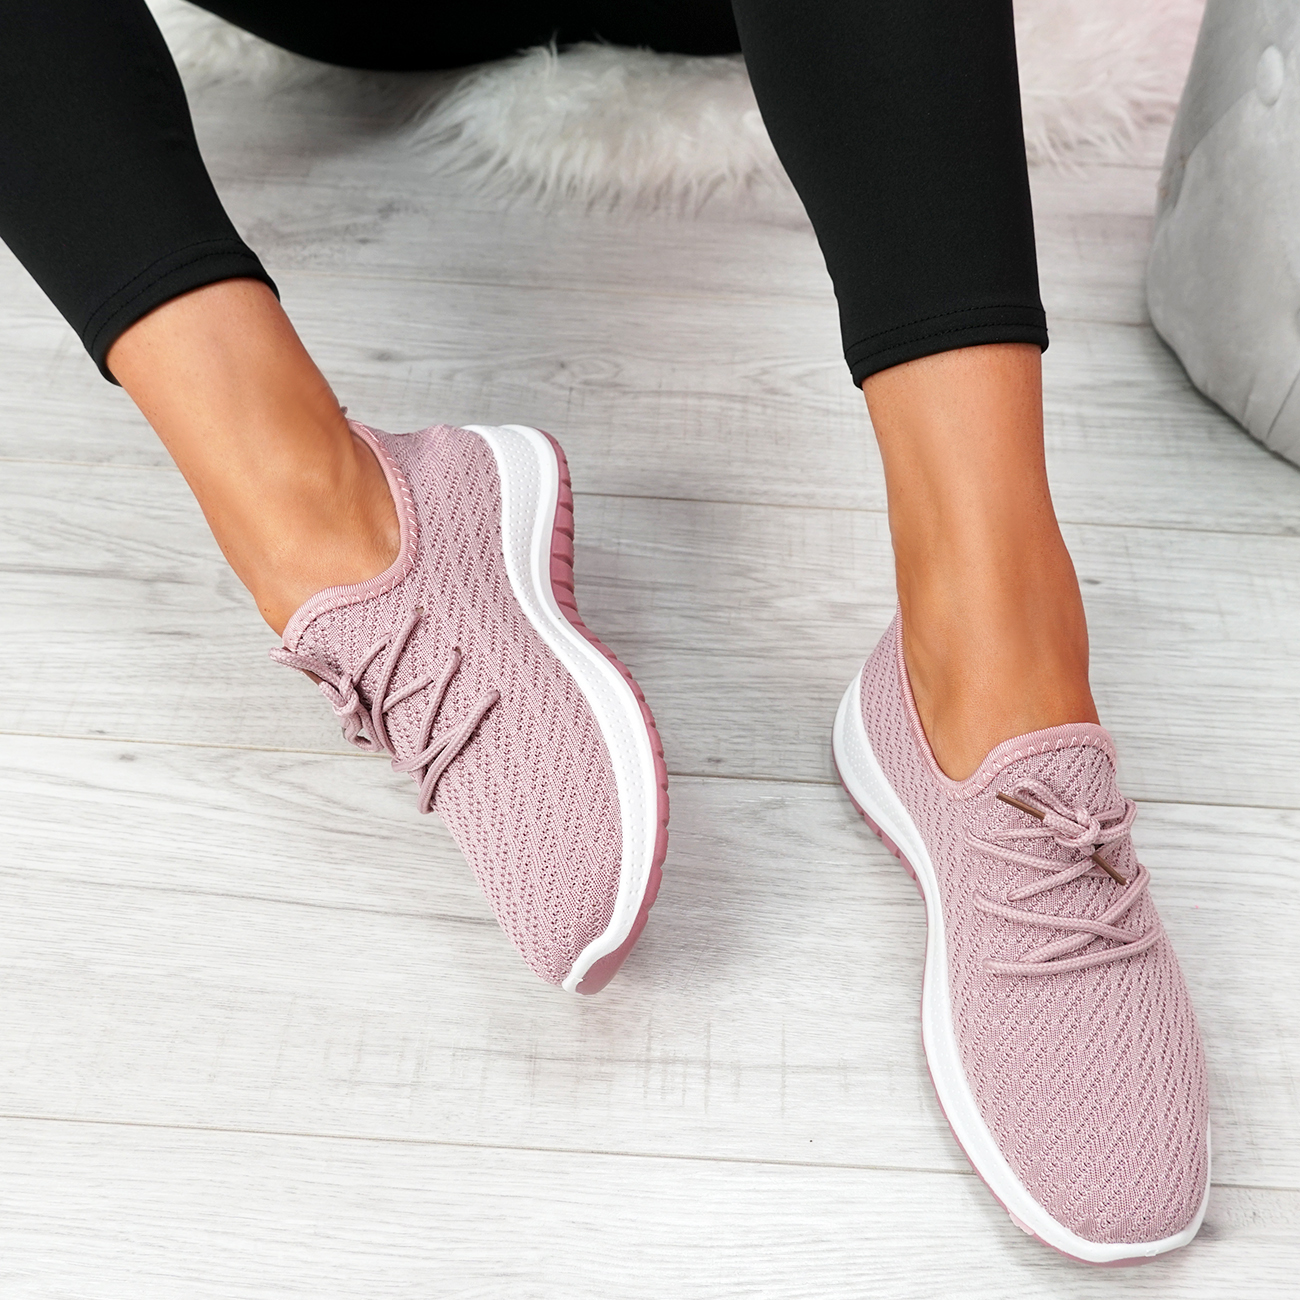 WOMENS LADIES SLIP ON KNIT RUNNING SNEAKERS FASHION TRAINERS WOMEN SHOES SIZE UK 